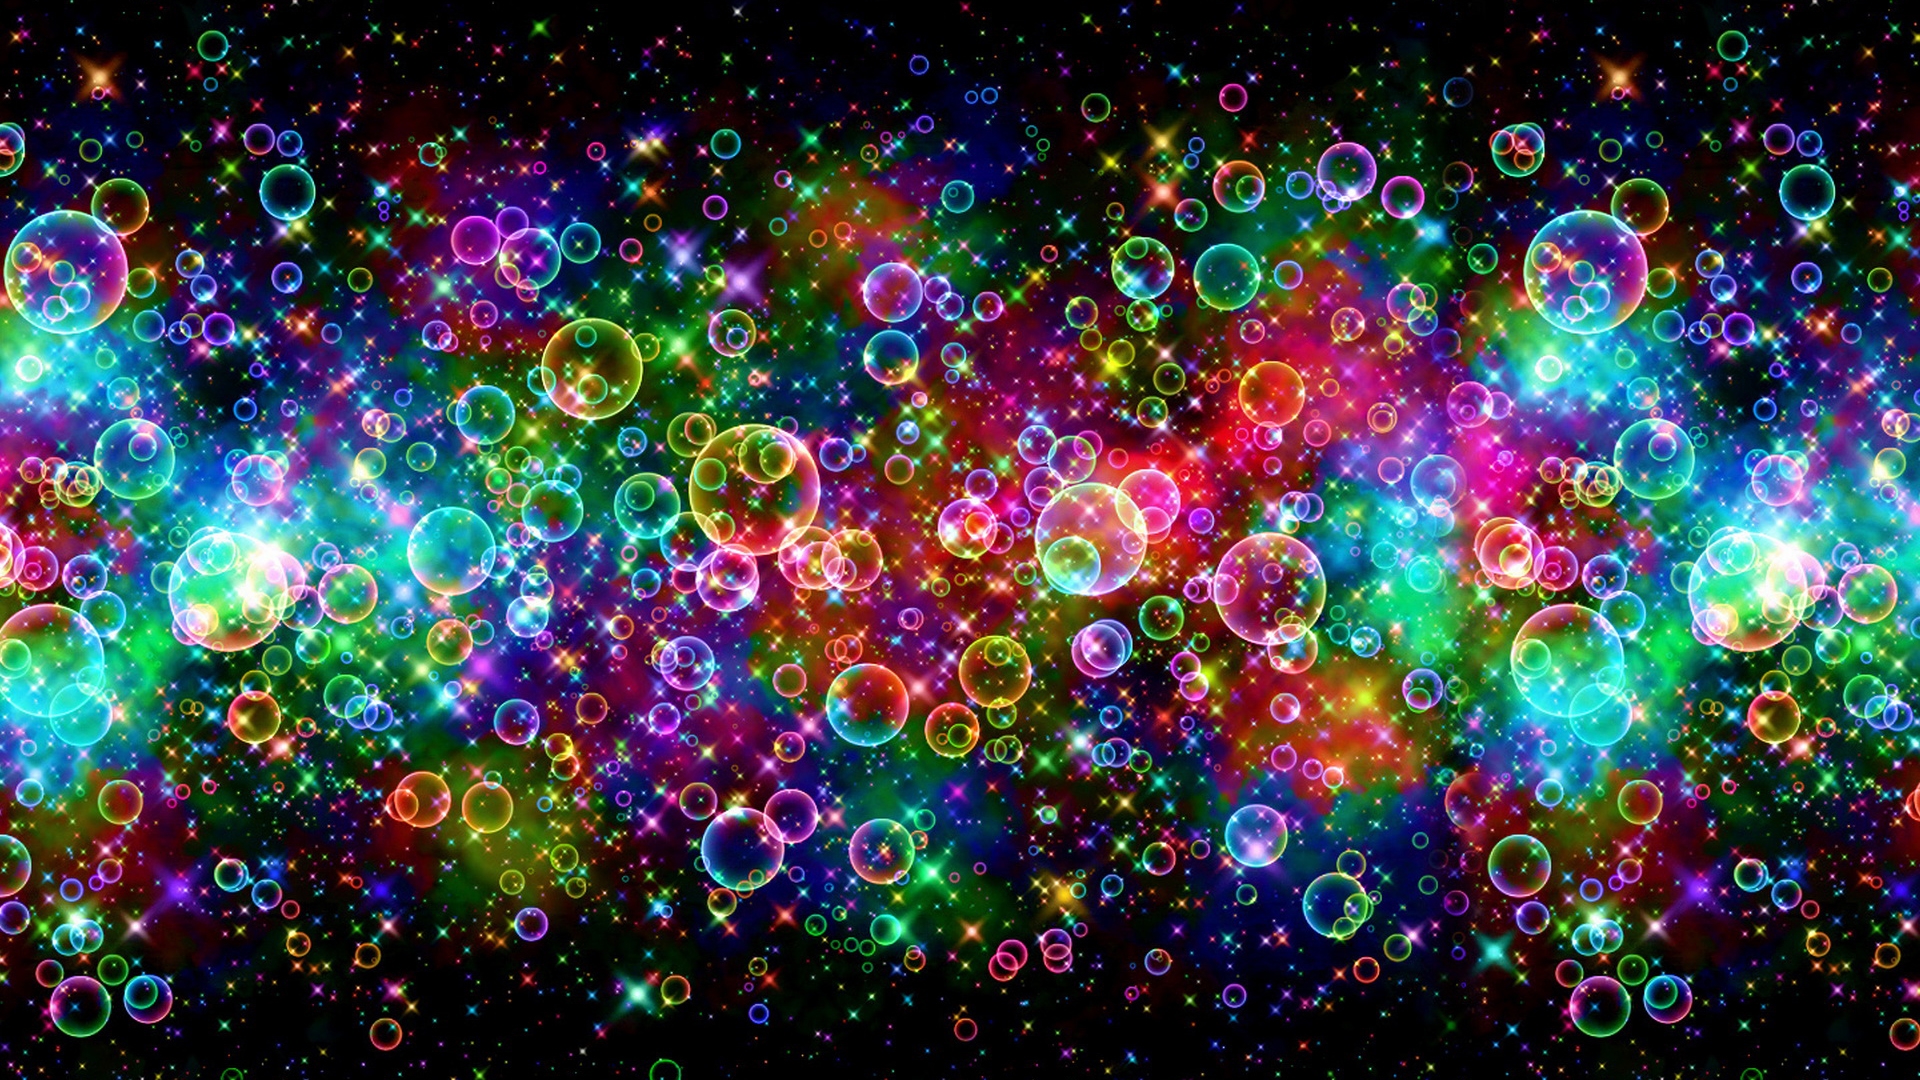 Colorful Backgrounds free download Wallpapers, Backgrounds